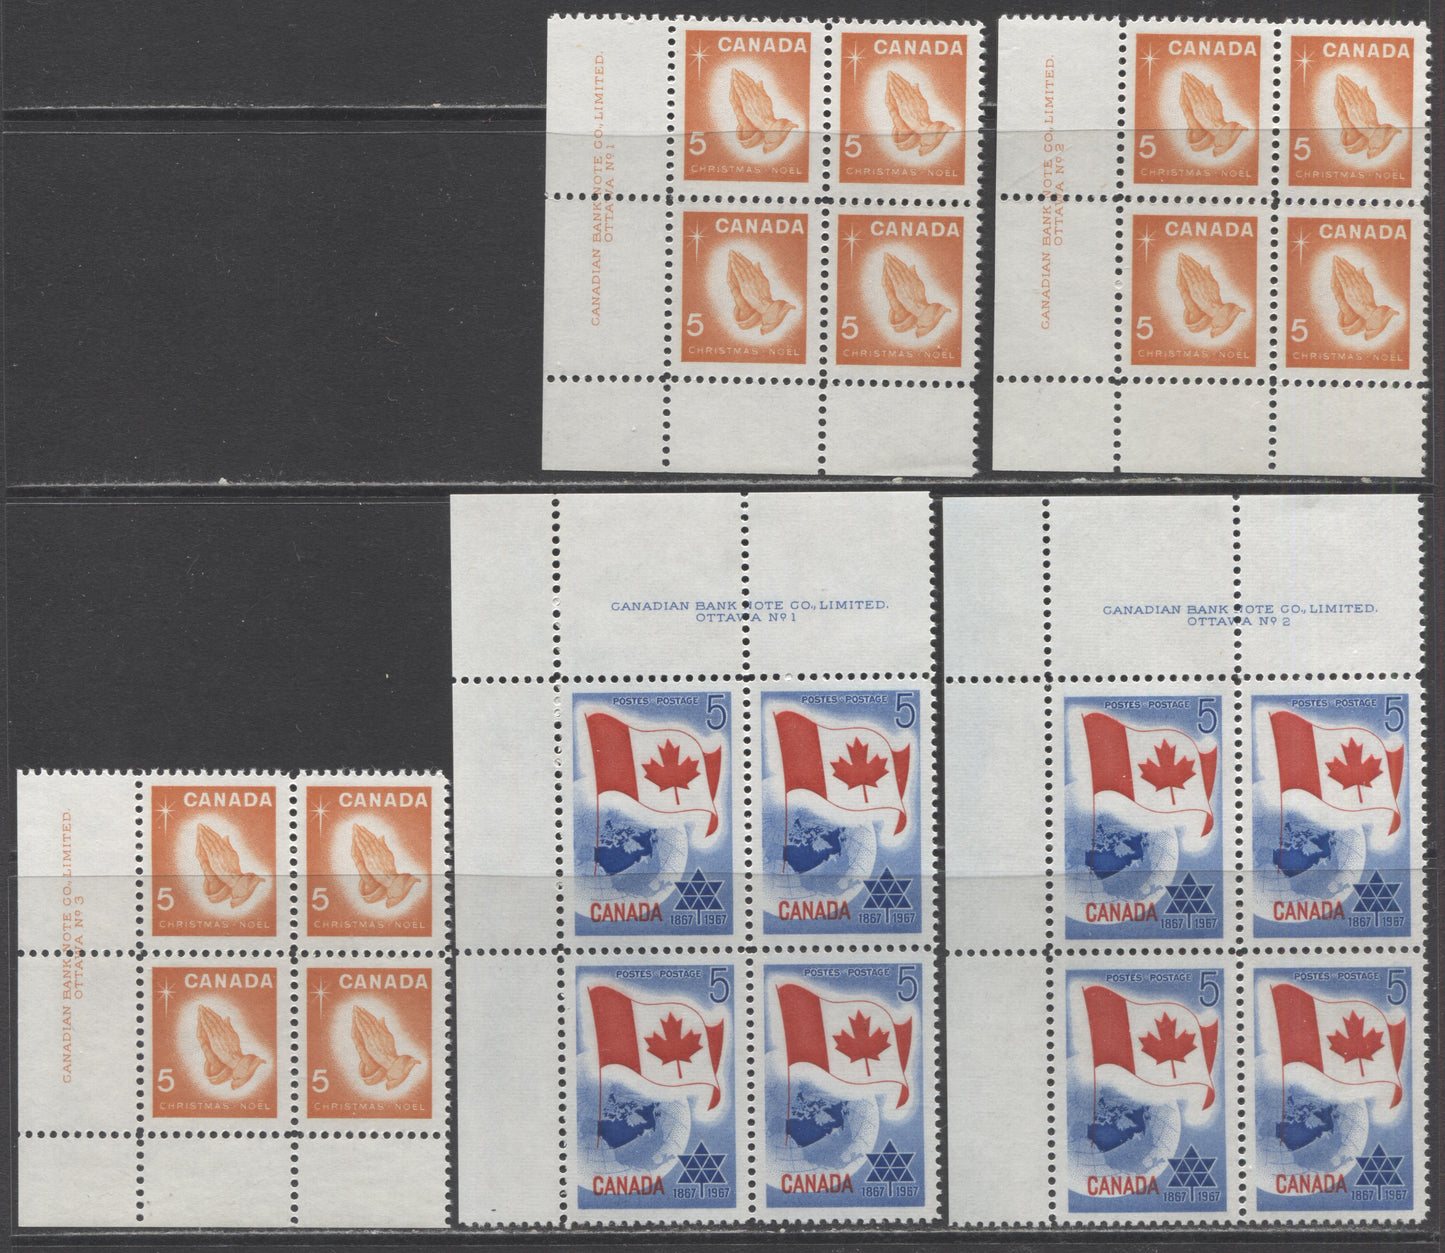 Lot 42 Canada #452-456 1c - 5c Brown - Blue & Red Queen Elizabeth II - Flag & Earth, 1966-1973 Commemoratives & Definitives, 10 VFNH LL and UL Plates 1-3 Blocks Of 4, 452 is on DF-fl and DF Paper